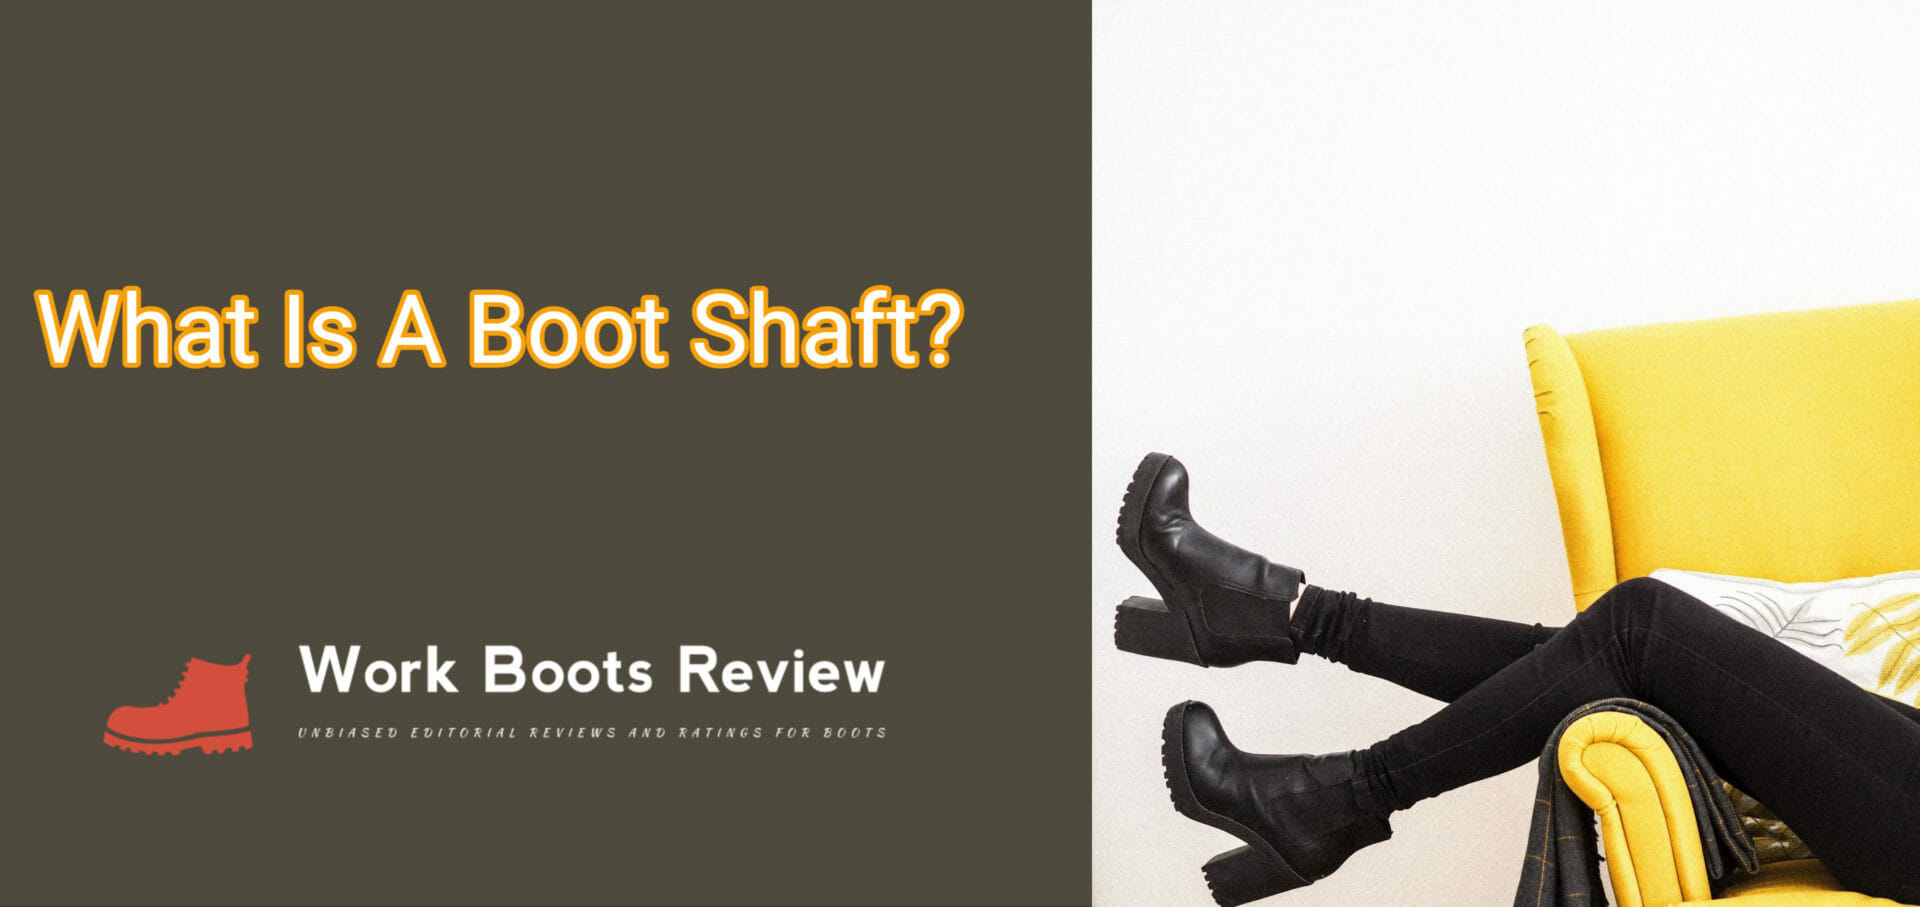 What is a Boot Shaft?